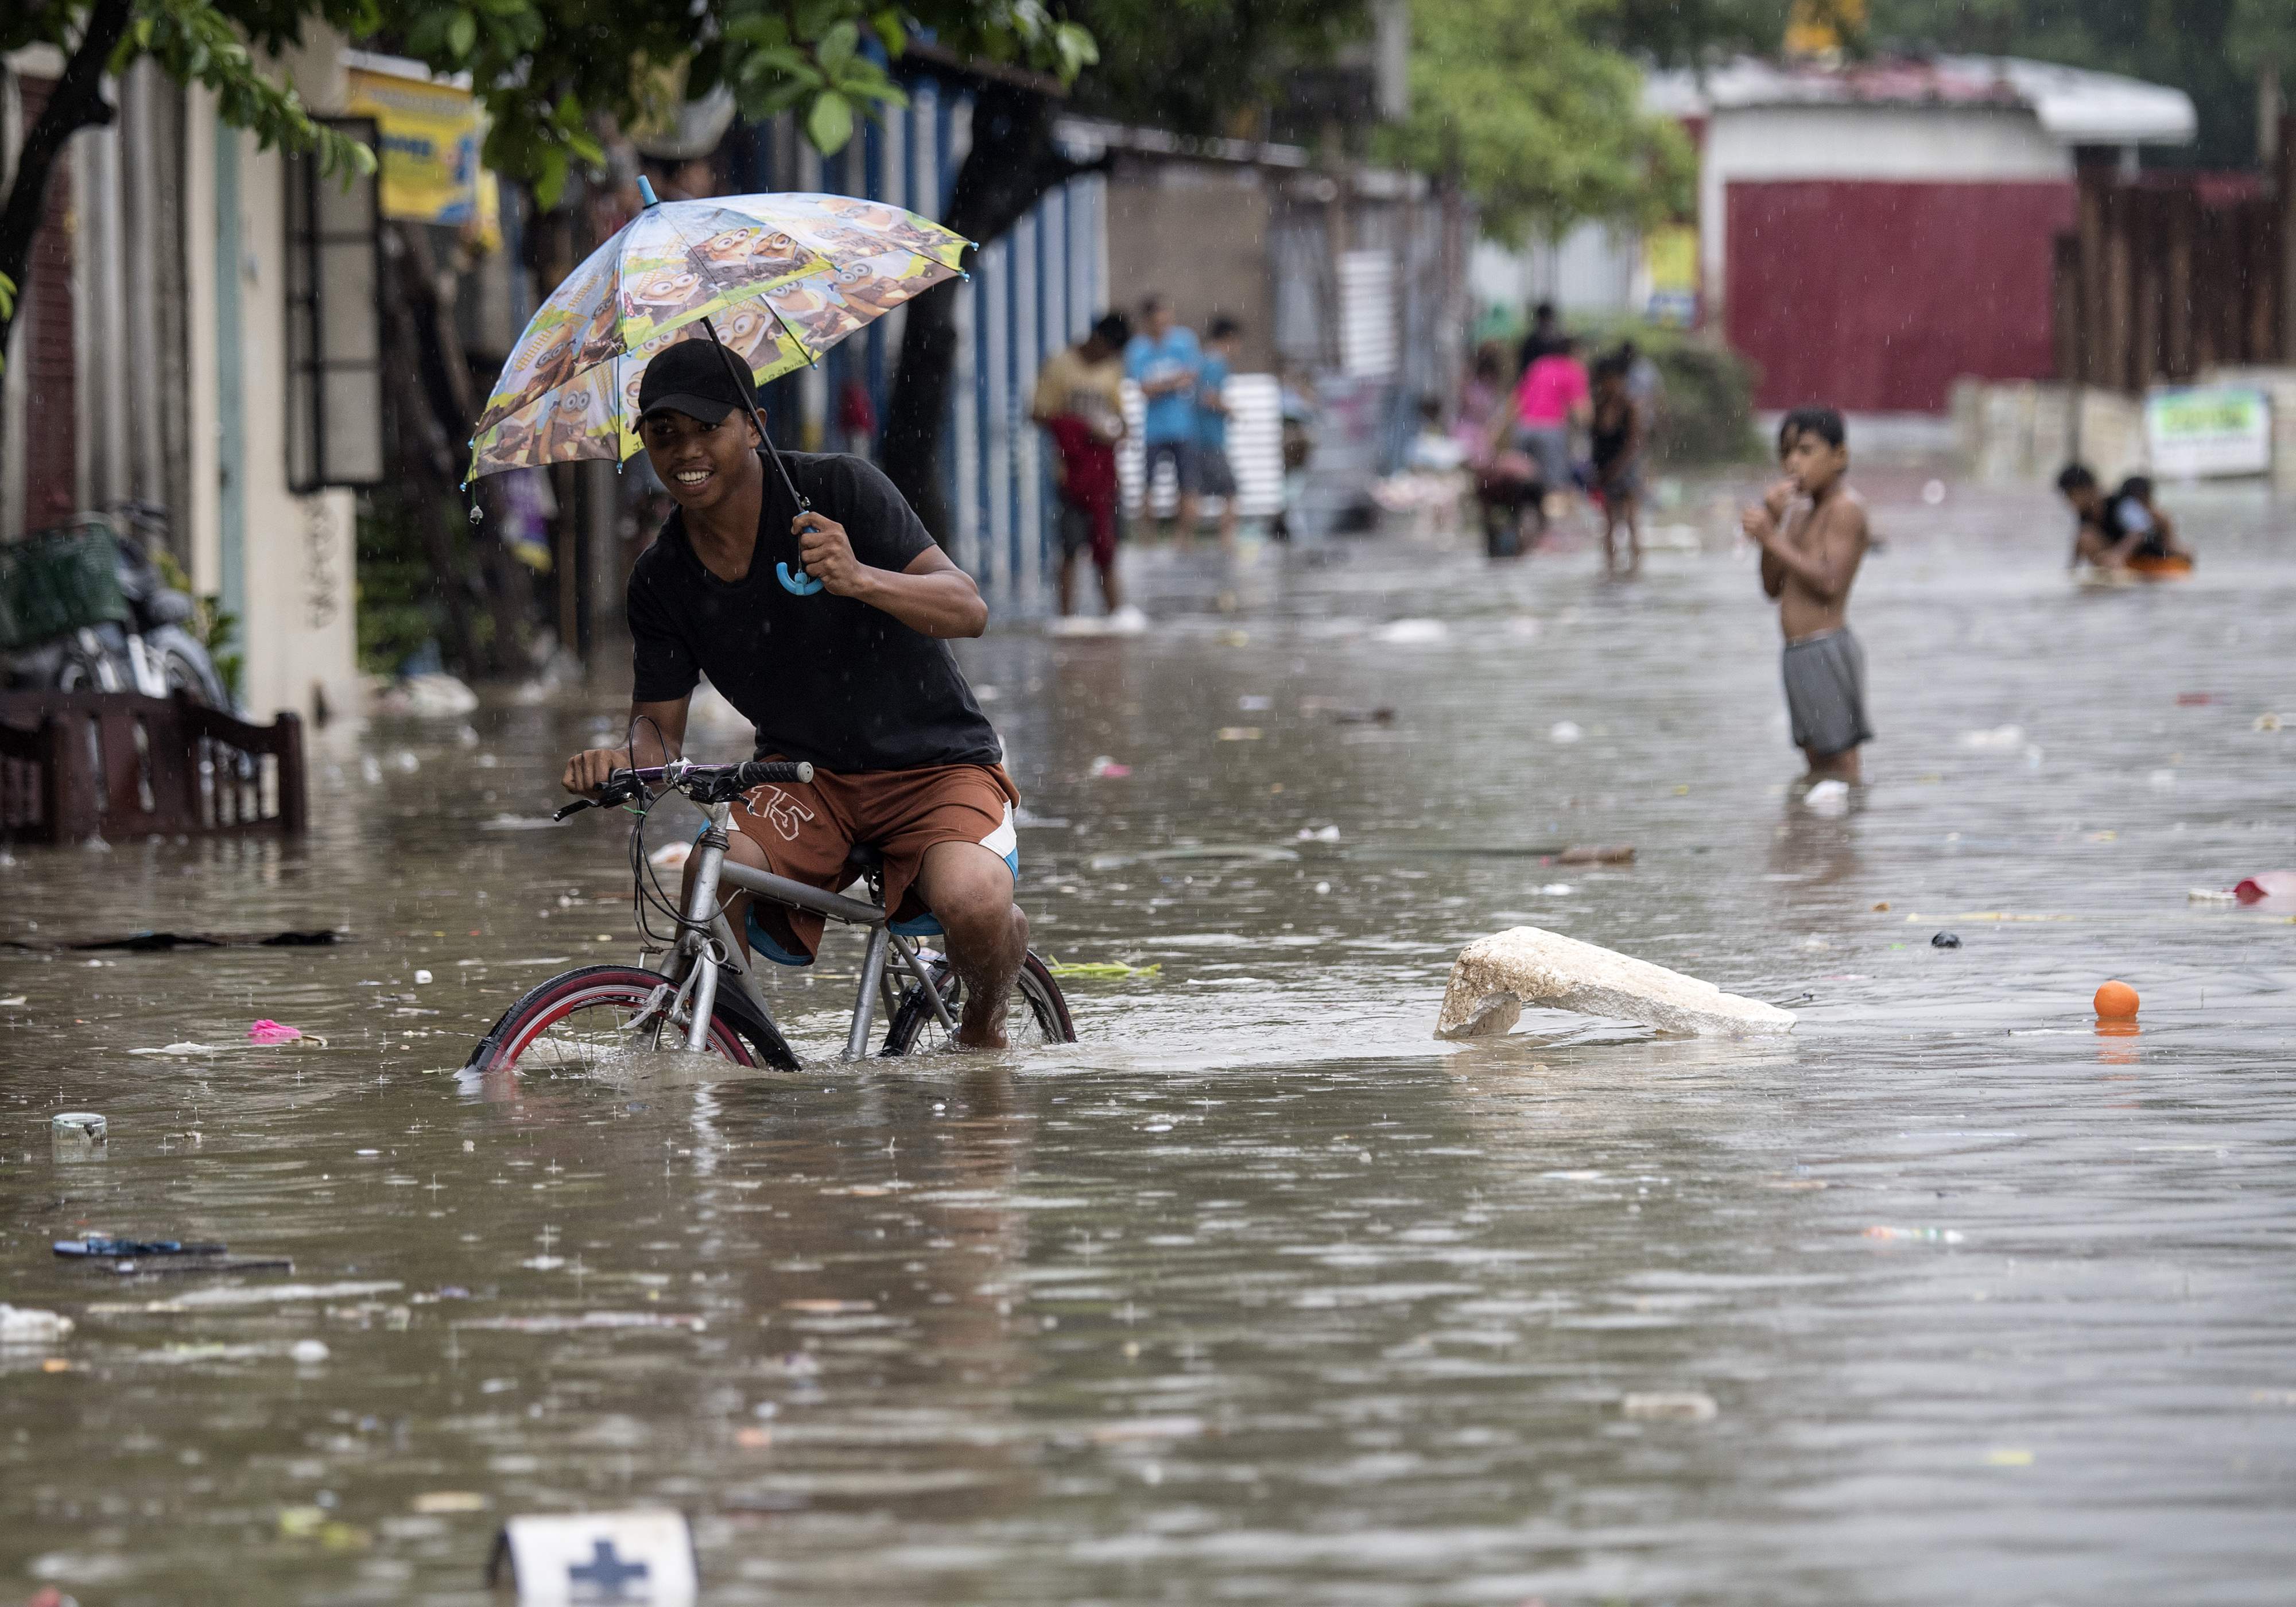 A man pedals his bicycle through a flooded street due to continuous rains caused by tropical depression Josie in Marikina, east of Manila on July 22, 2018.